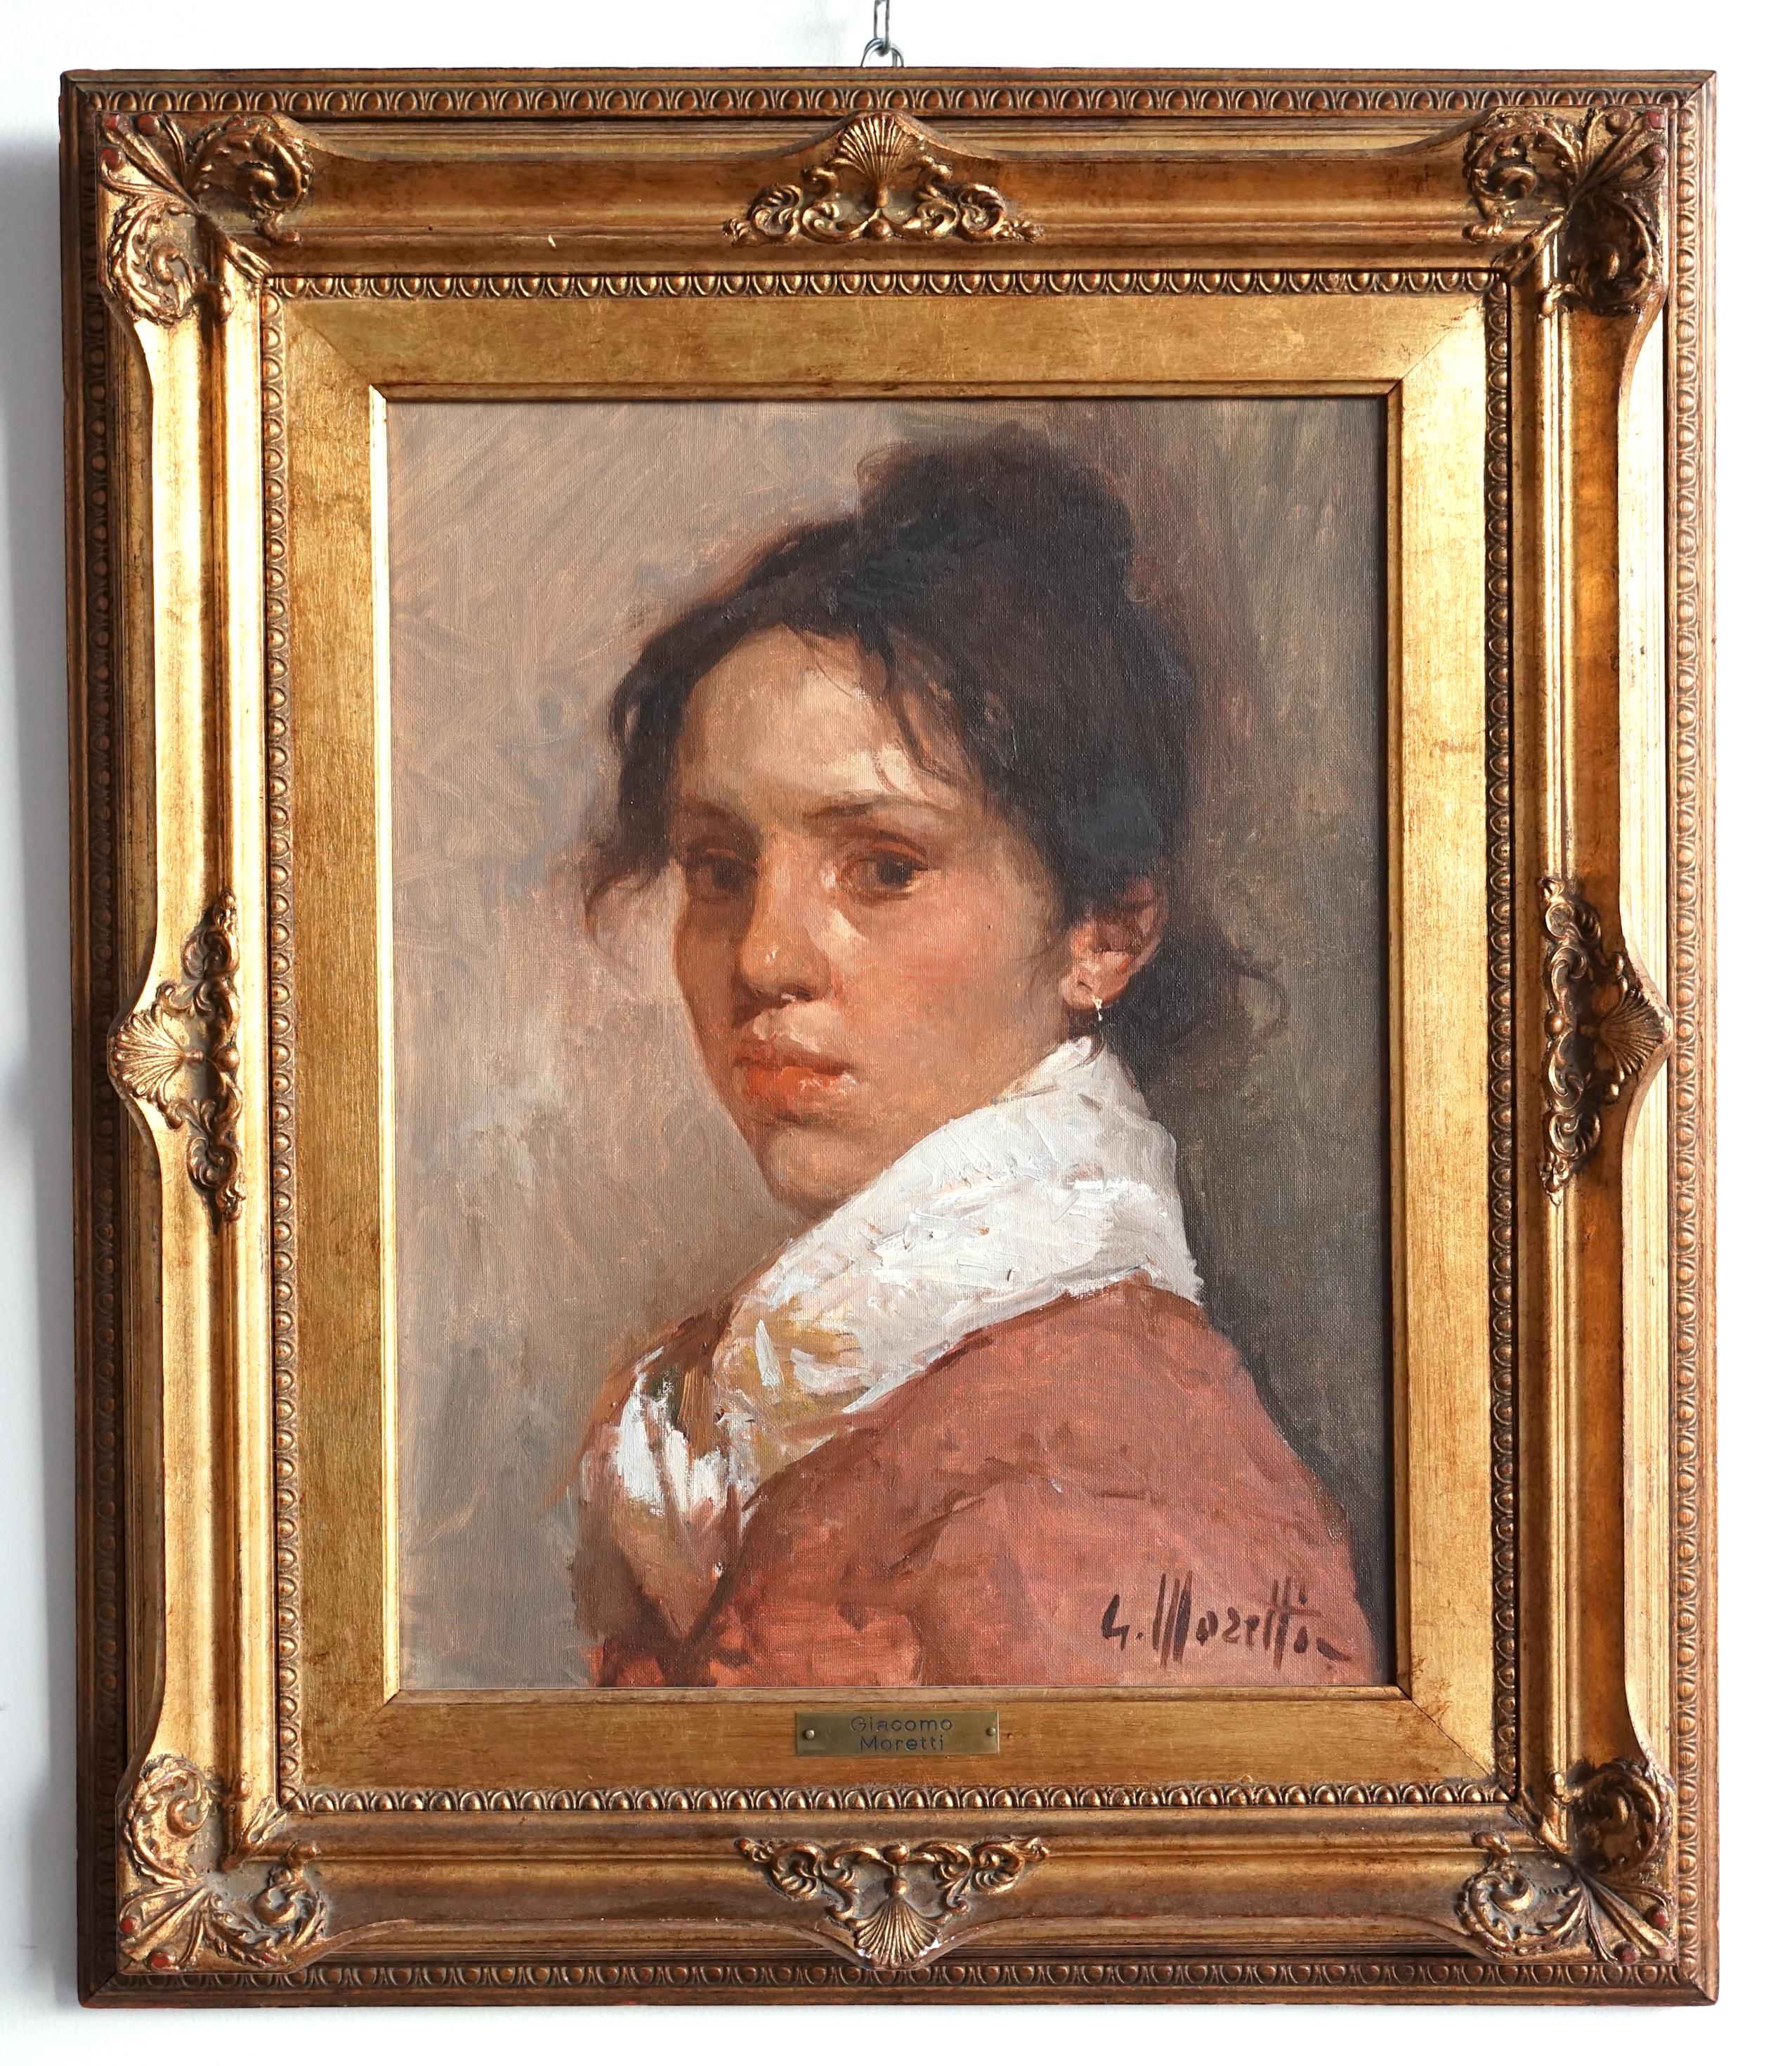 Painting of young commoner, signed Giacomo Moretti
Epoch: 1940
Size: 57x65 cm with frame, 35x45 cm canvas only
Material: Oil On Canvas
Condition: Very good condition
Origin: Naples
Author: Giacomo Moretti
Description: The painting in question is an